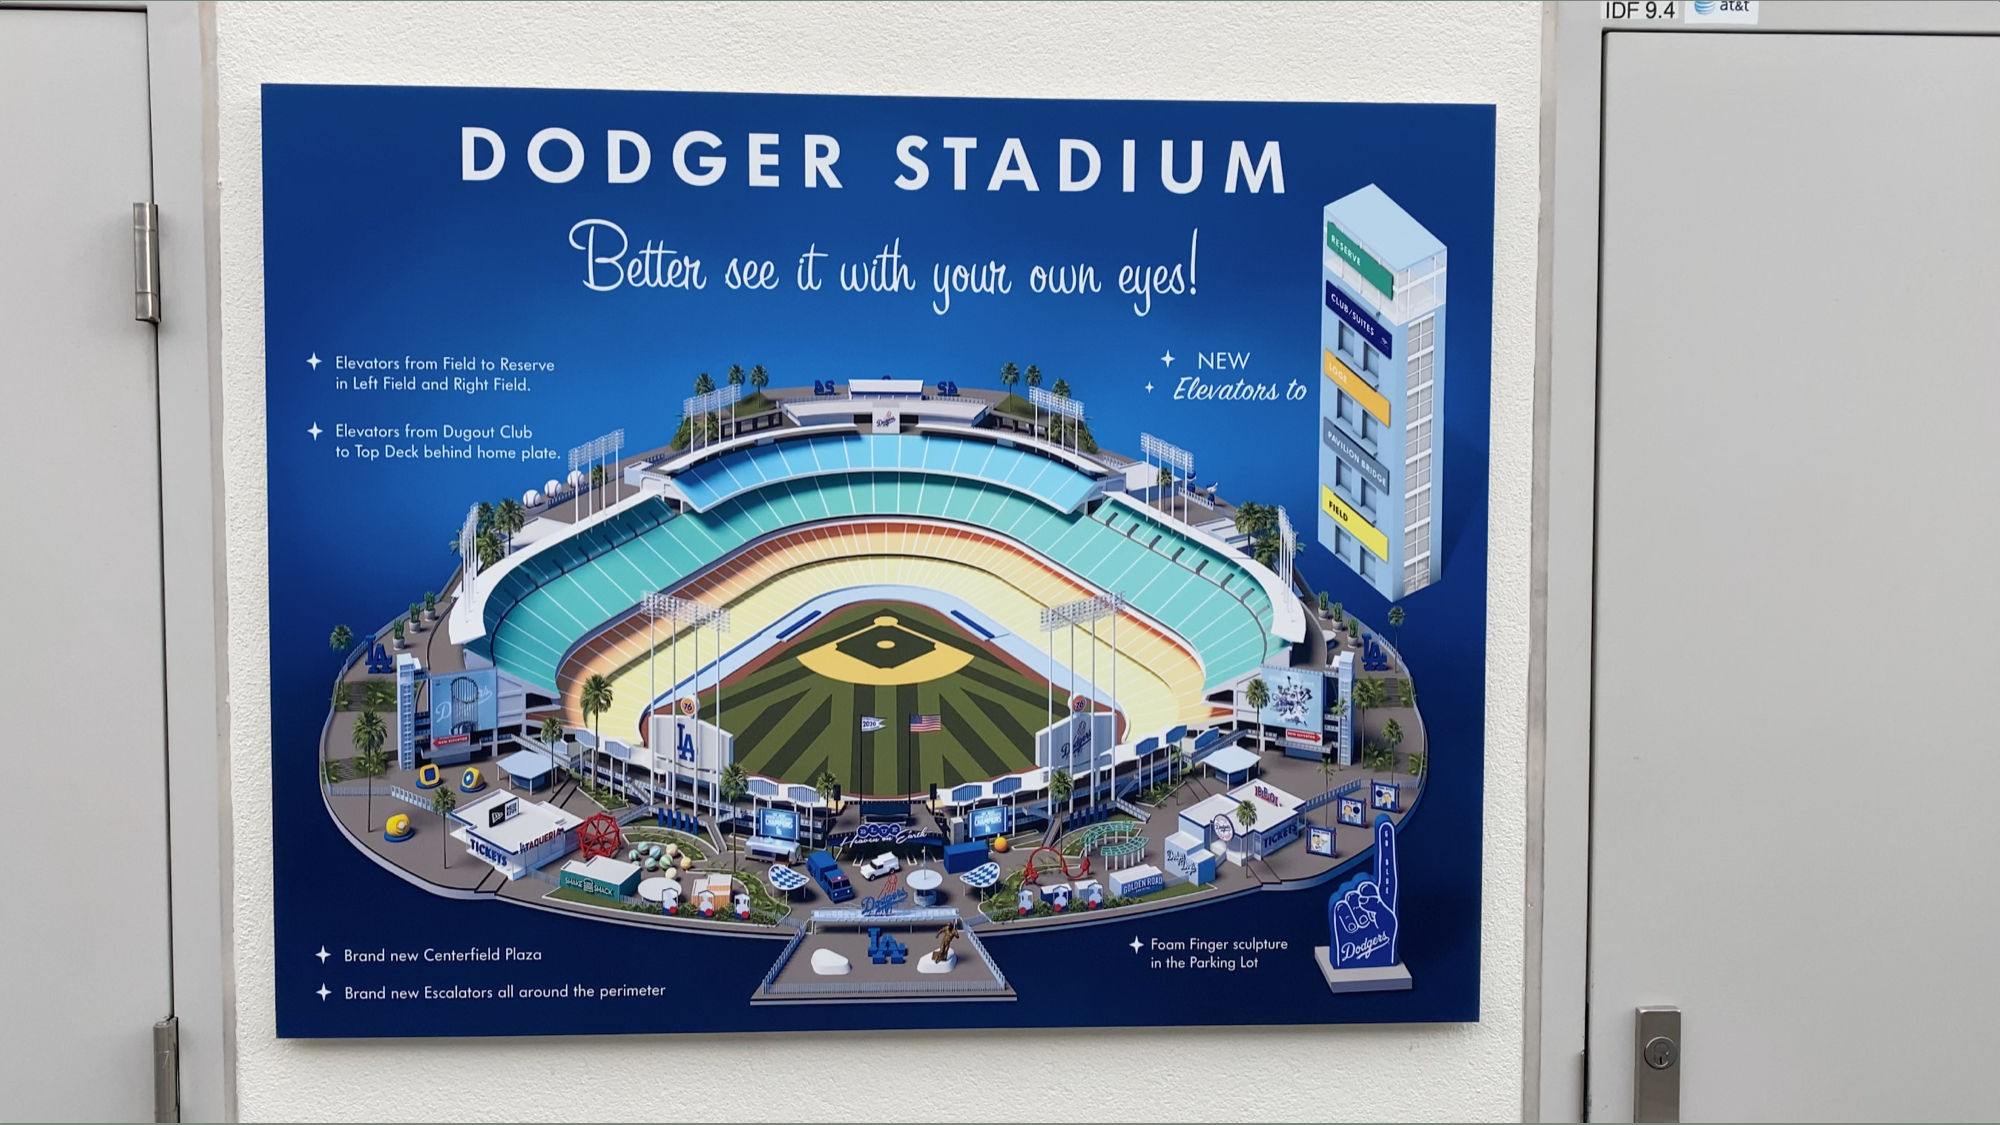 Dodger Stadium See it with your own eyes